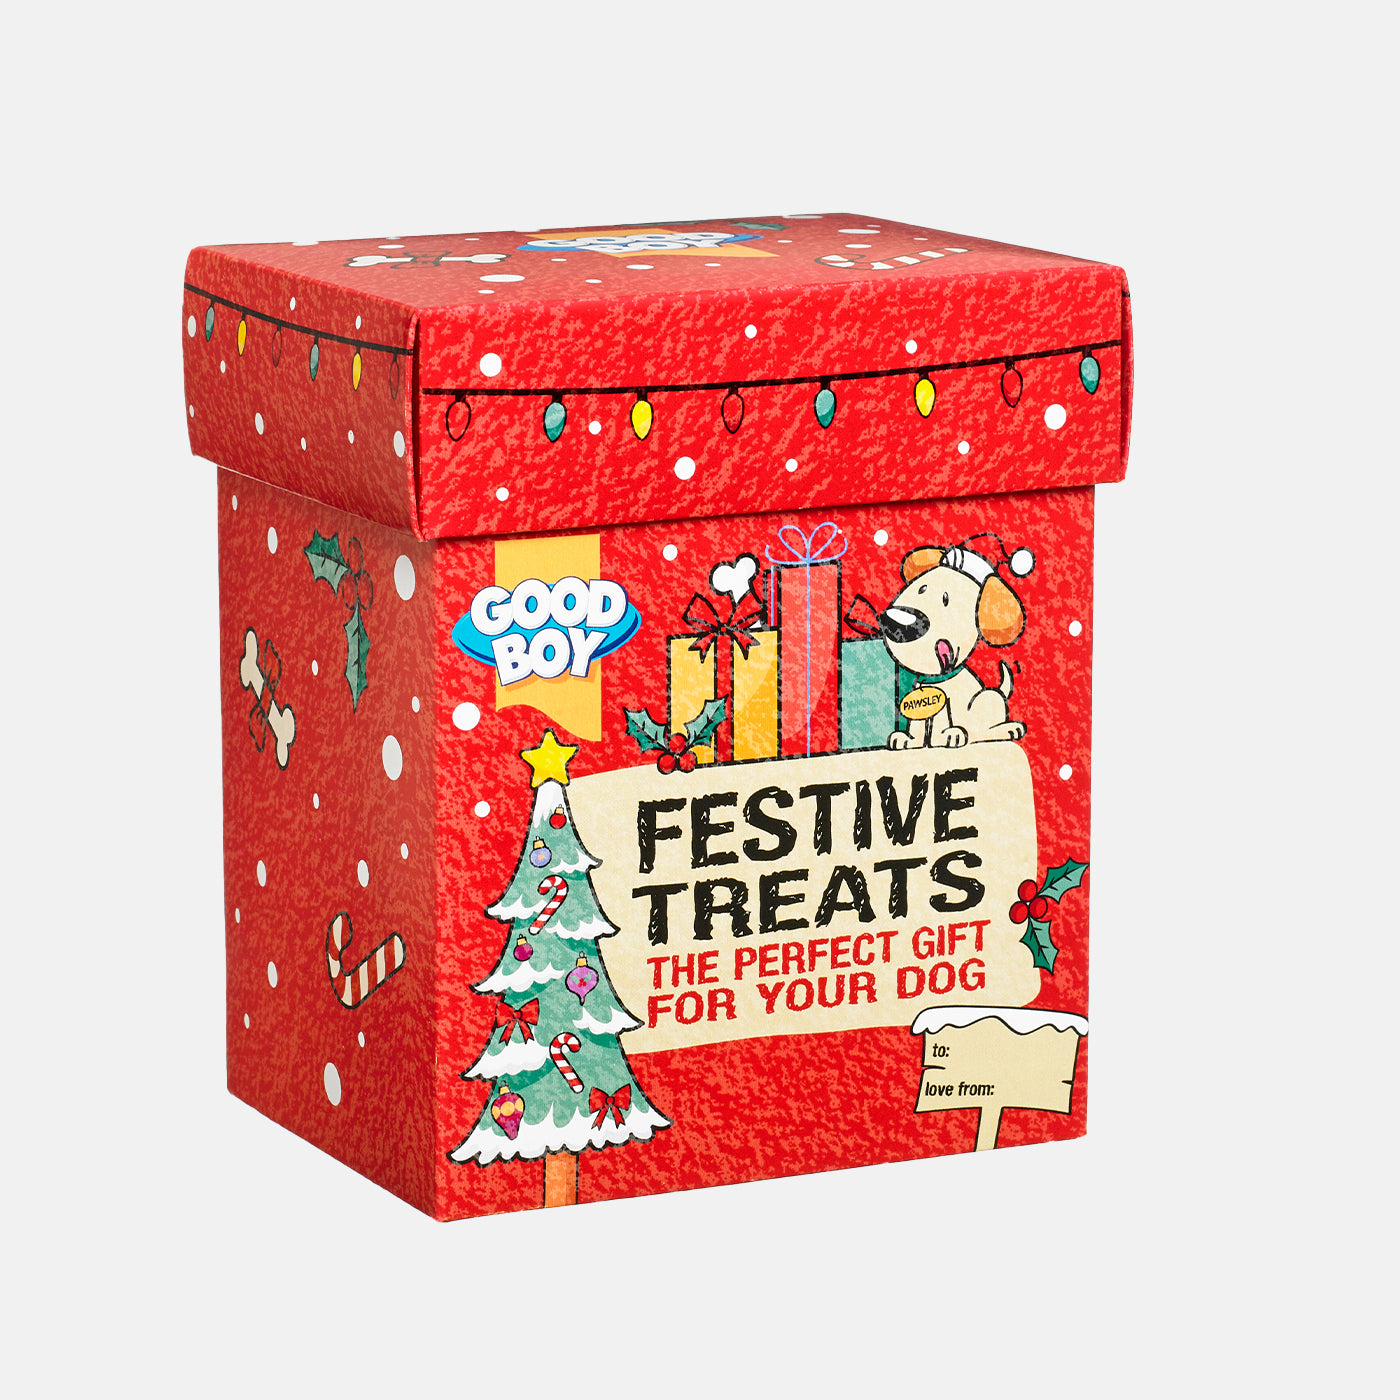 Good Boy Festive Dog Treats Gift Box, The Perfect Christmas Gift For Your Dog, Available Now at Lords & Labradors